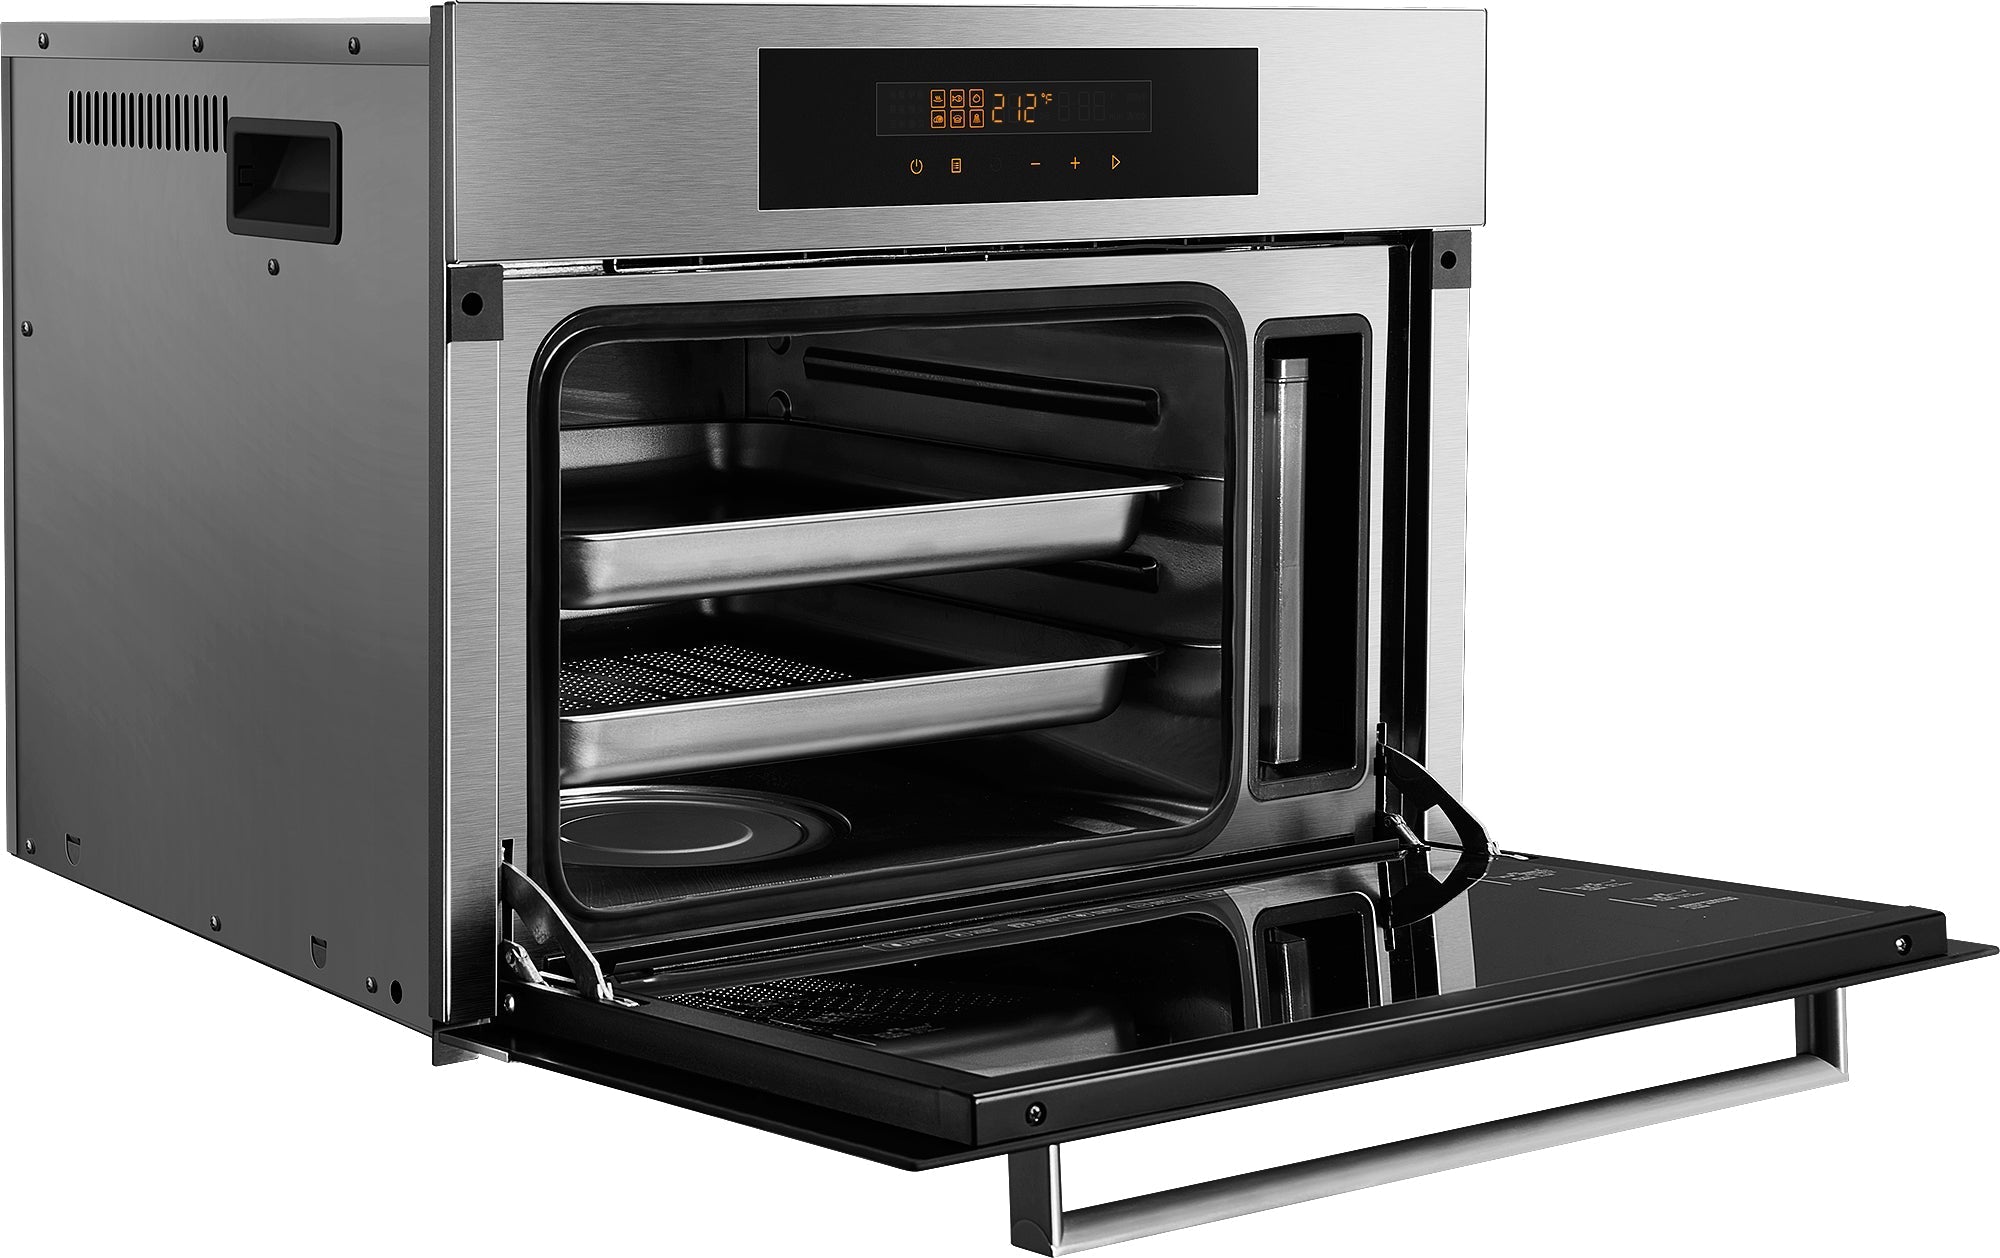 Fotile 24 in. Built-In Steam Oven in Stainless Steel (SCD42-F1)